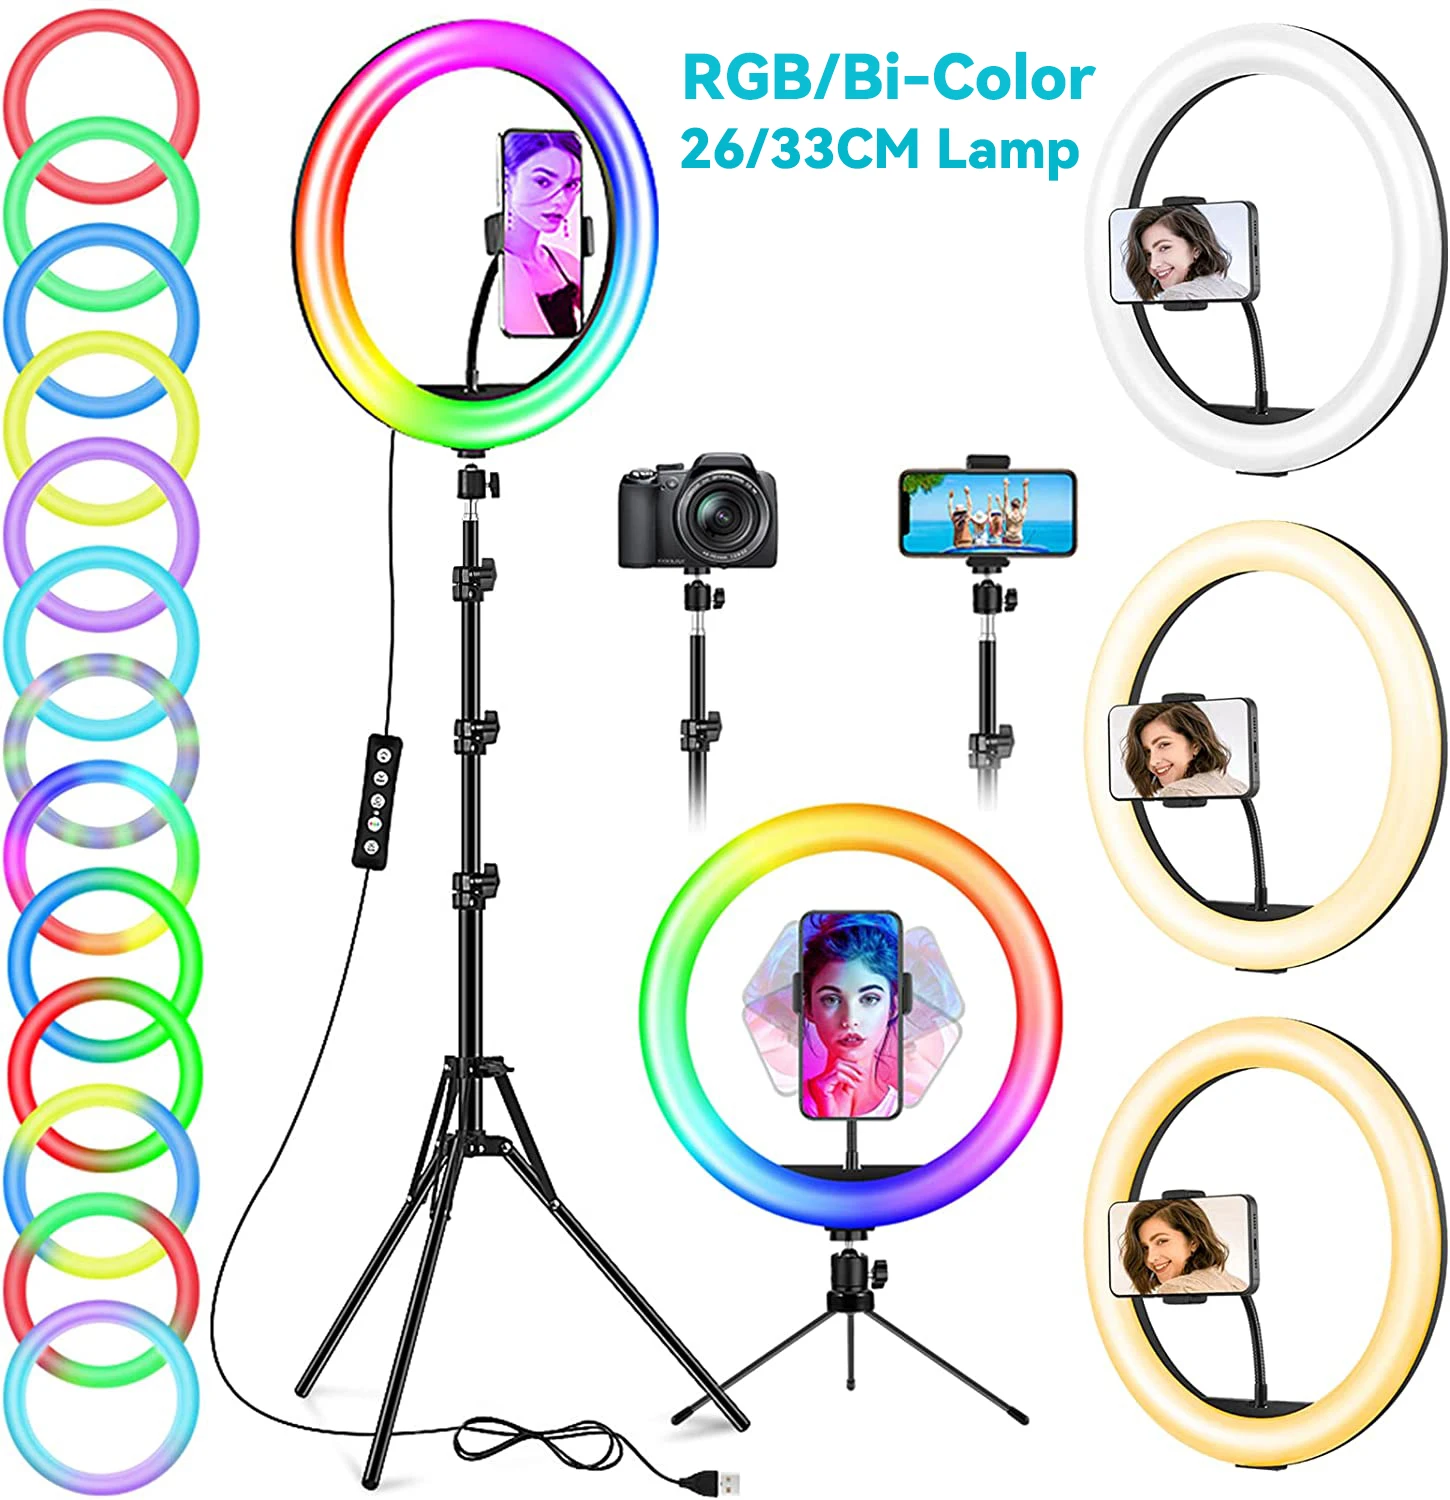 

12inch RGB Led Ring Light With 0.5/1.6 Tripod Colorful 33/26cm Photographic Selfie Lighting For Youtube Live With Remote Control